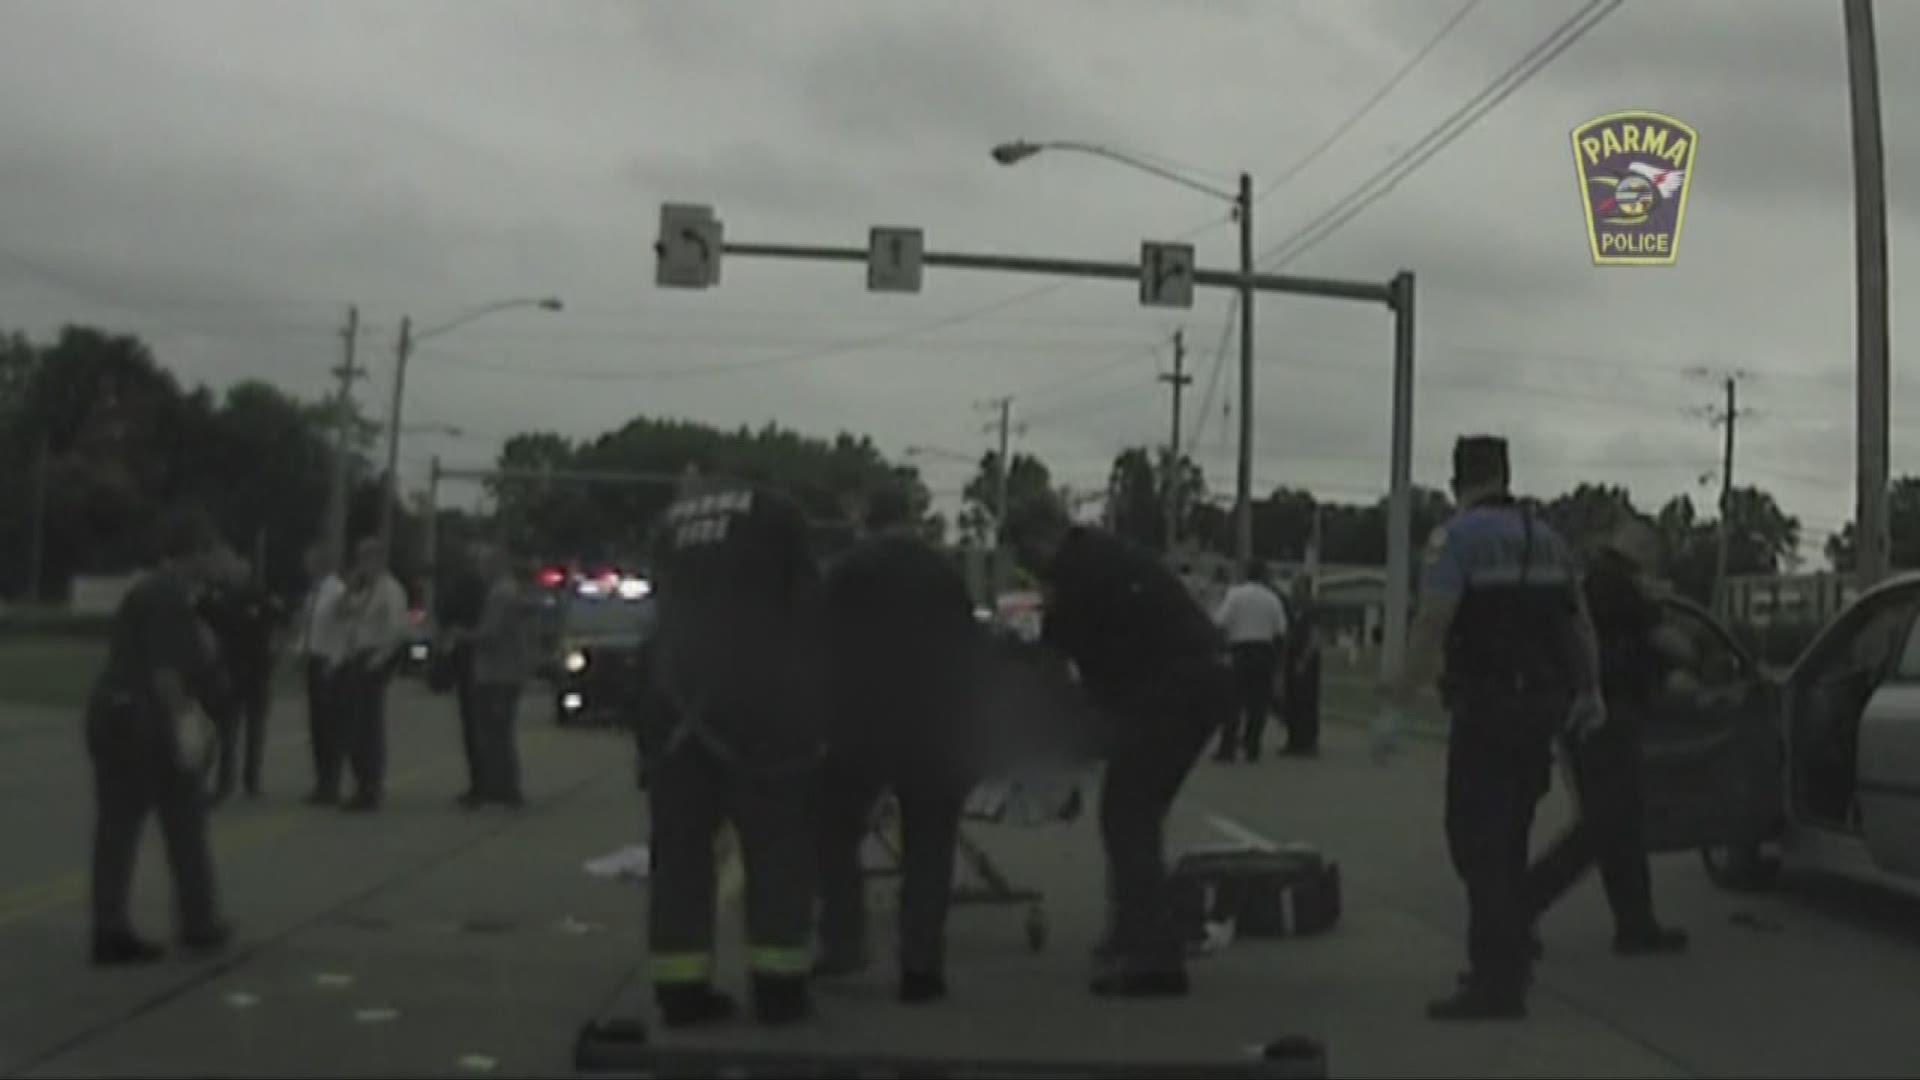 New video: Aftermath of shooting that injured Parma heights officer